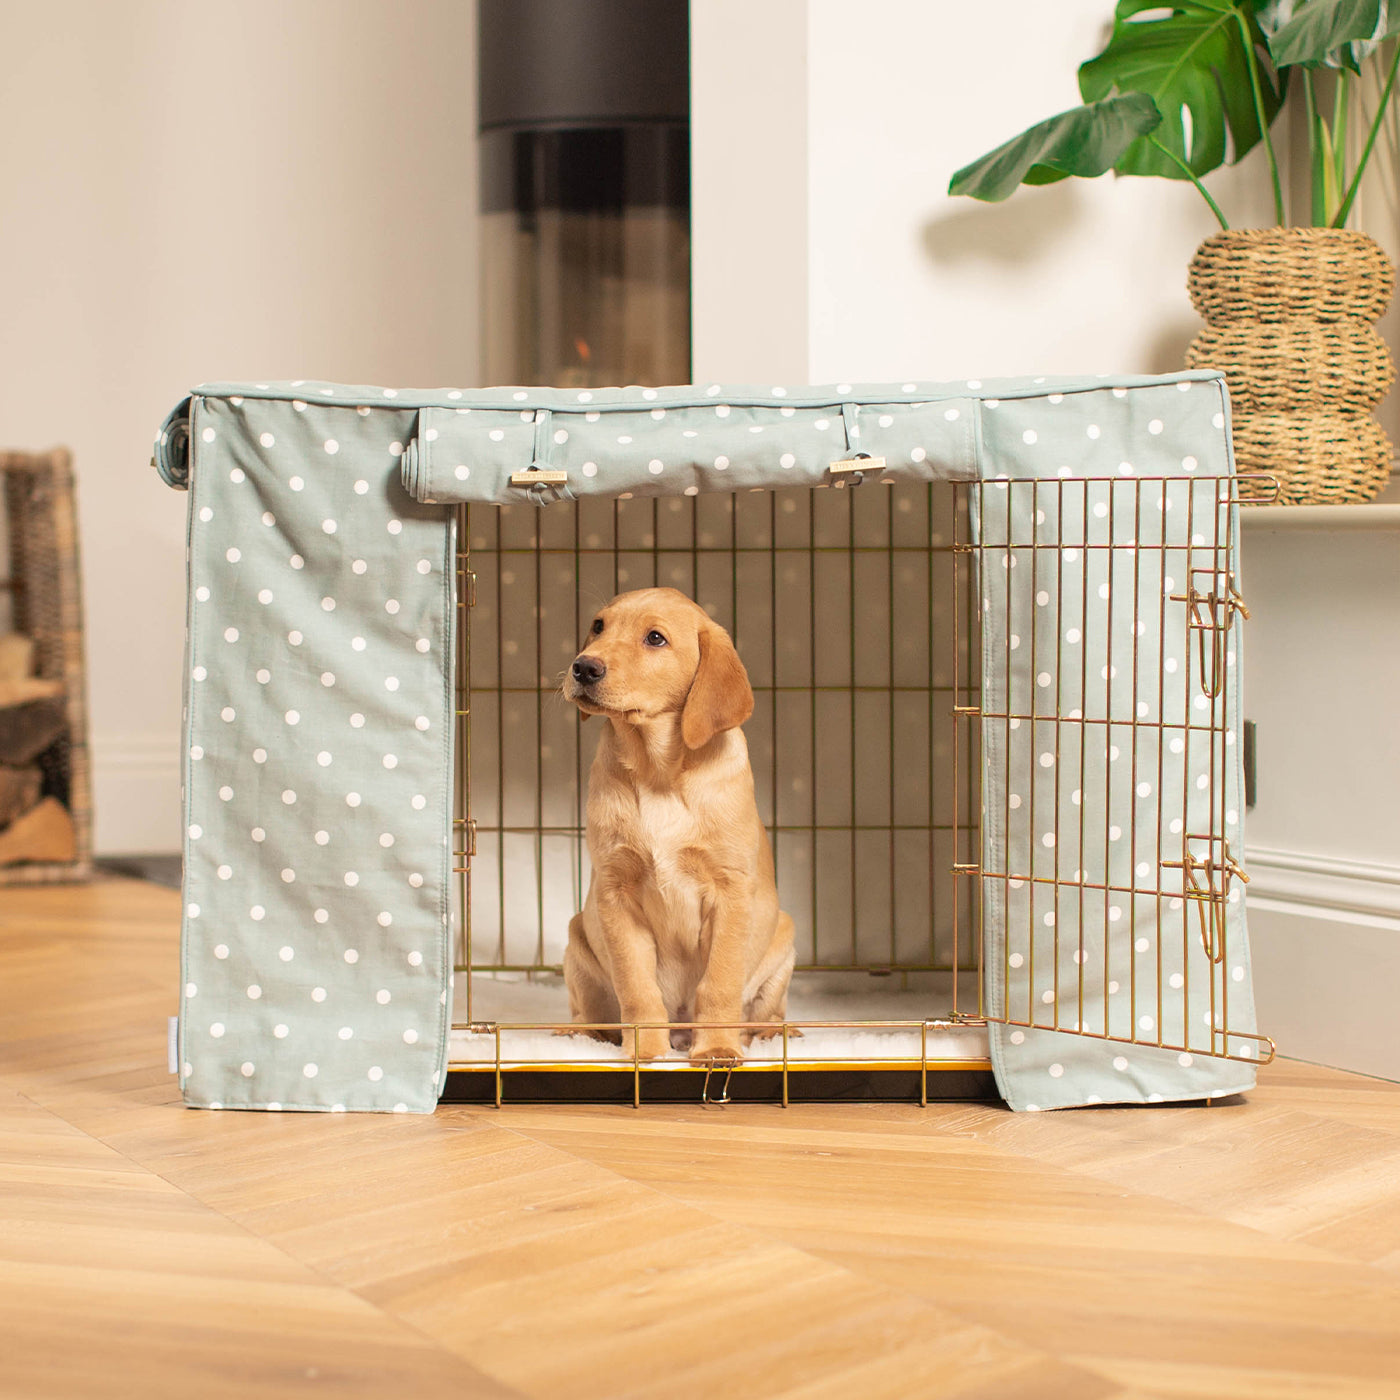 Luxury Gold Dog Cage Set With Crate Cover, The Perfect Dog Crate For The Ultimate Naptime, Available Now at Lords & Labradors US